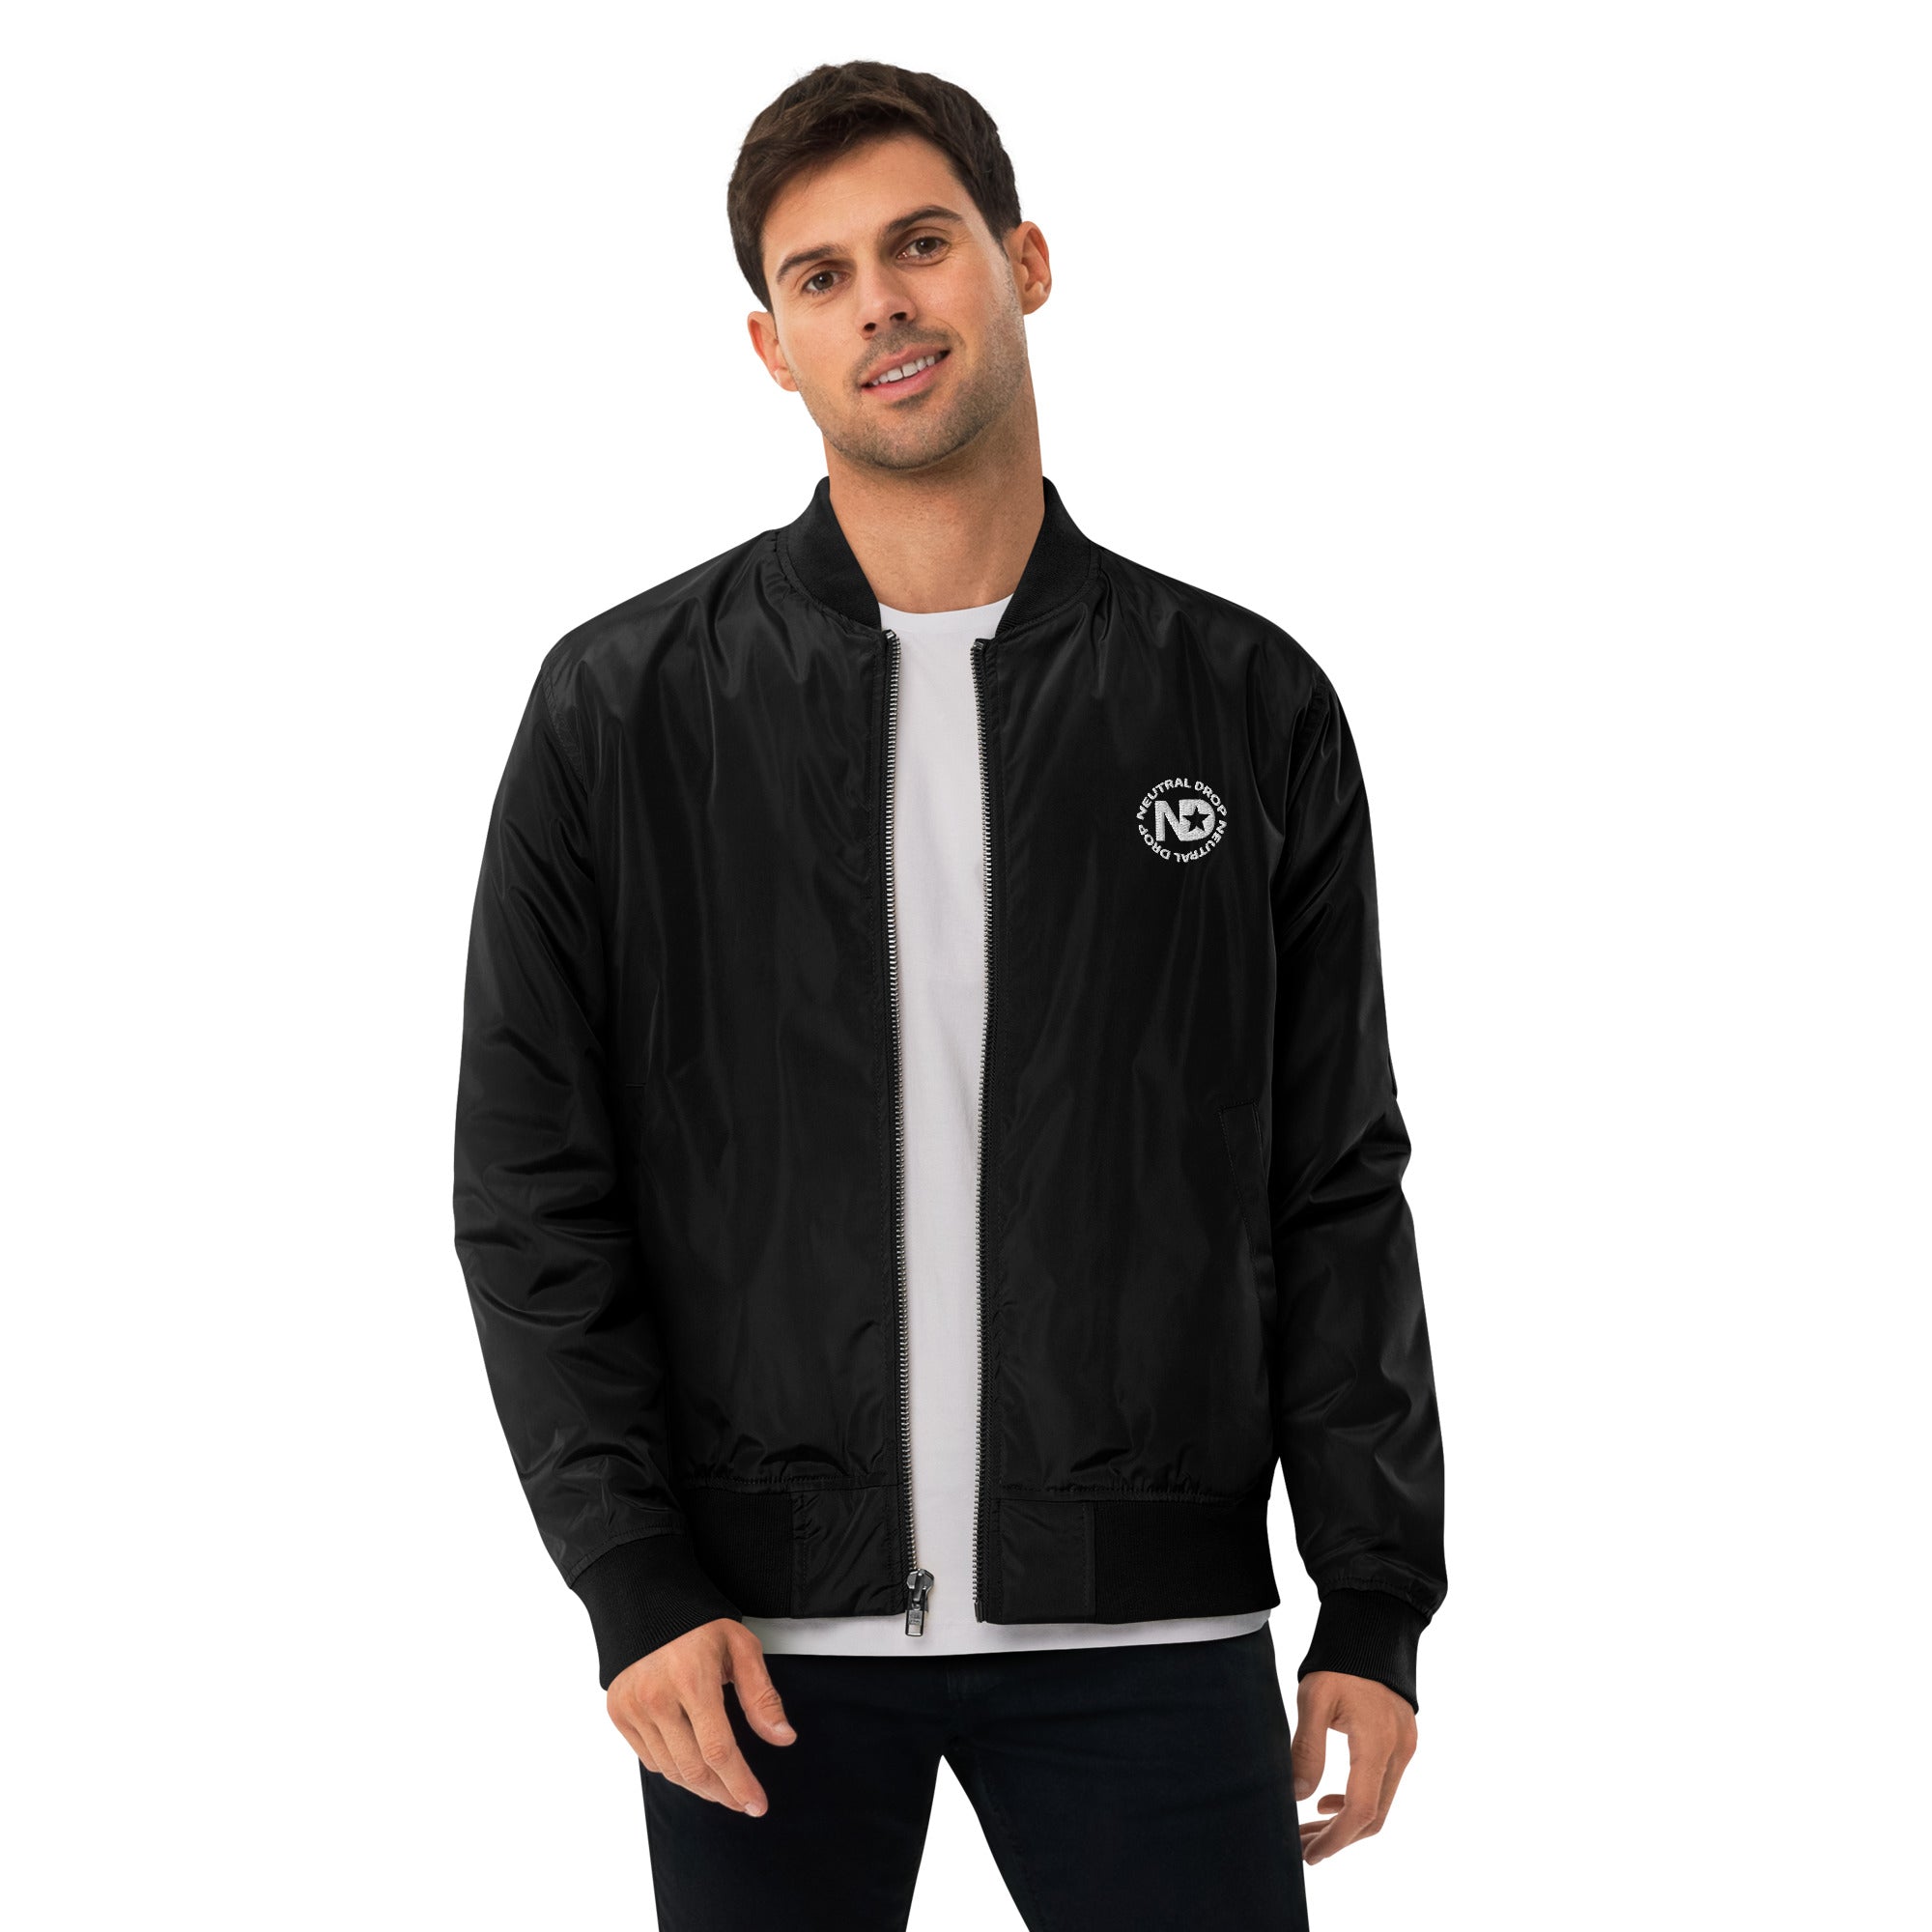 Premium recycled bomber jacket with Neutral Drop logo front and back